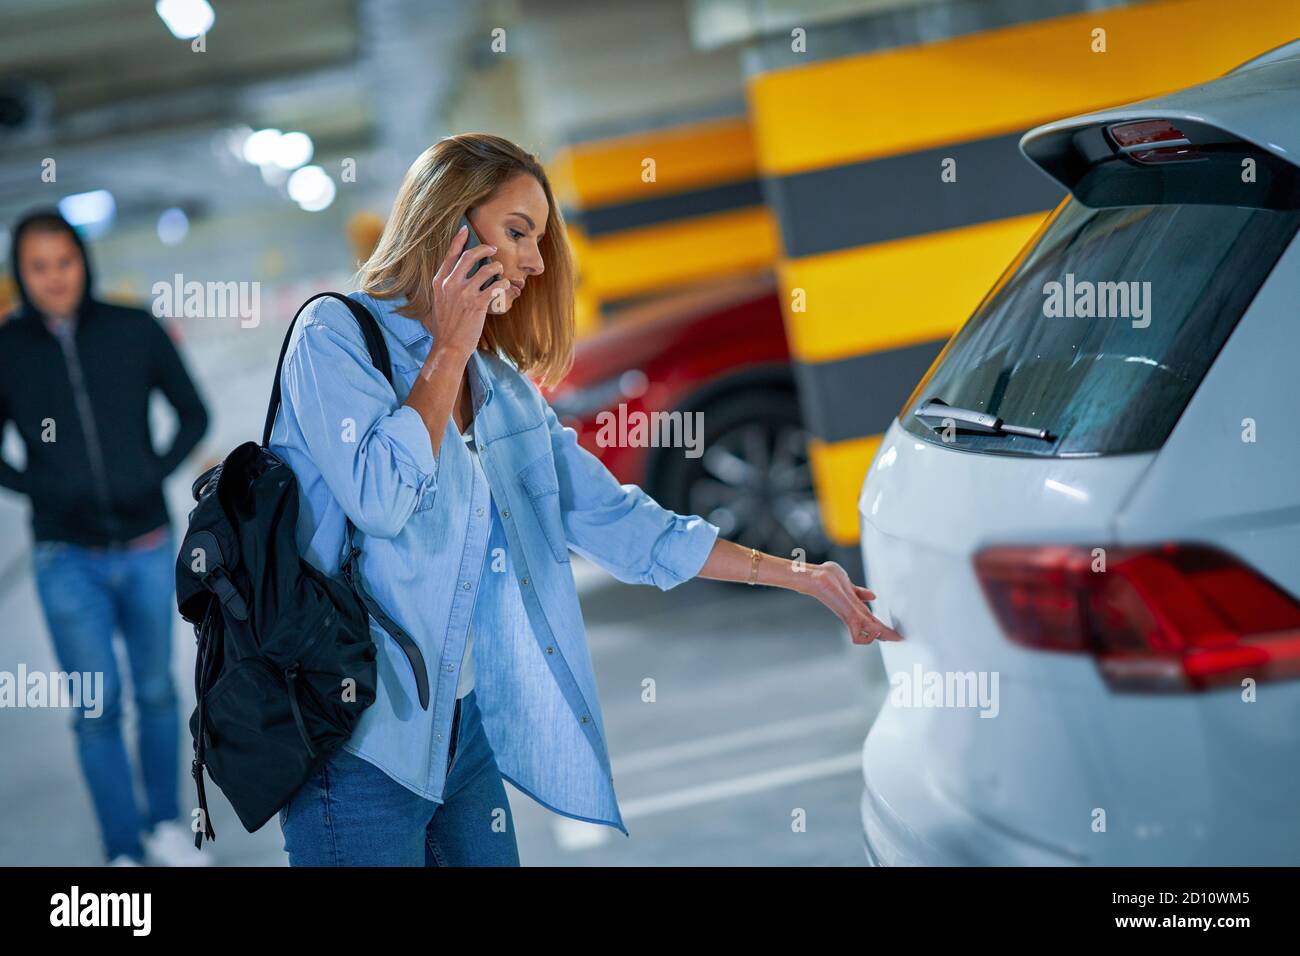 Criminal man in black hoodie approaching young woman opening car on parking Stock Photo